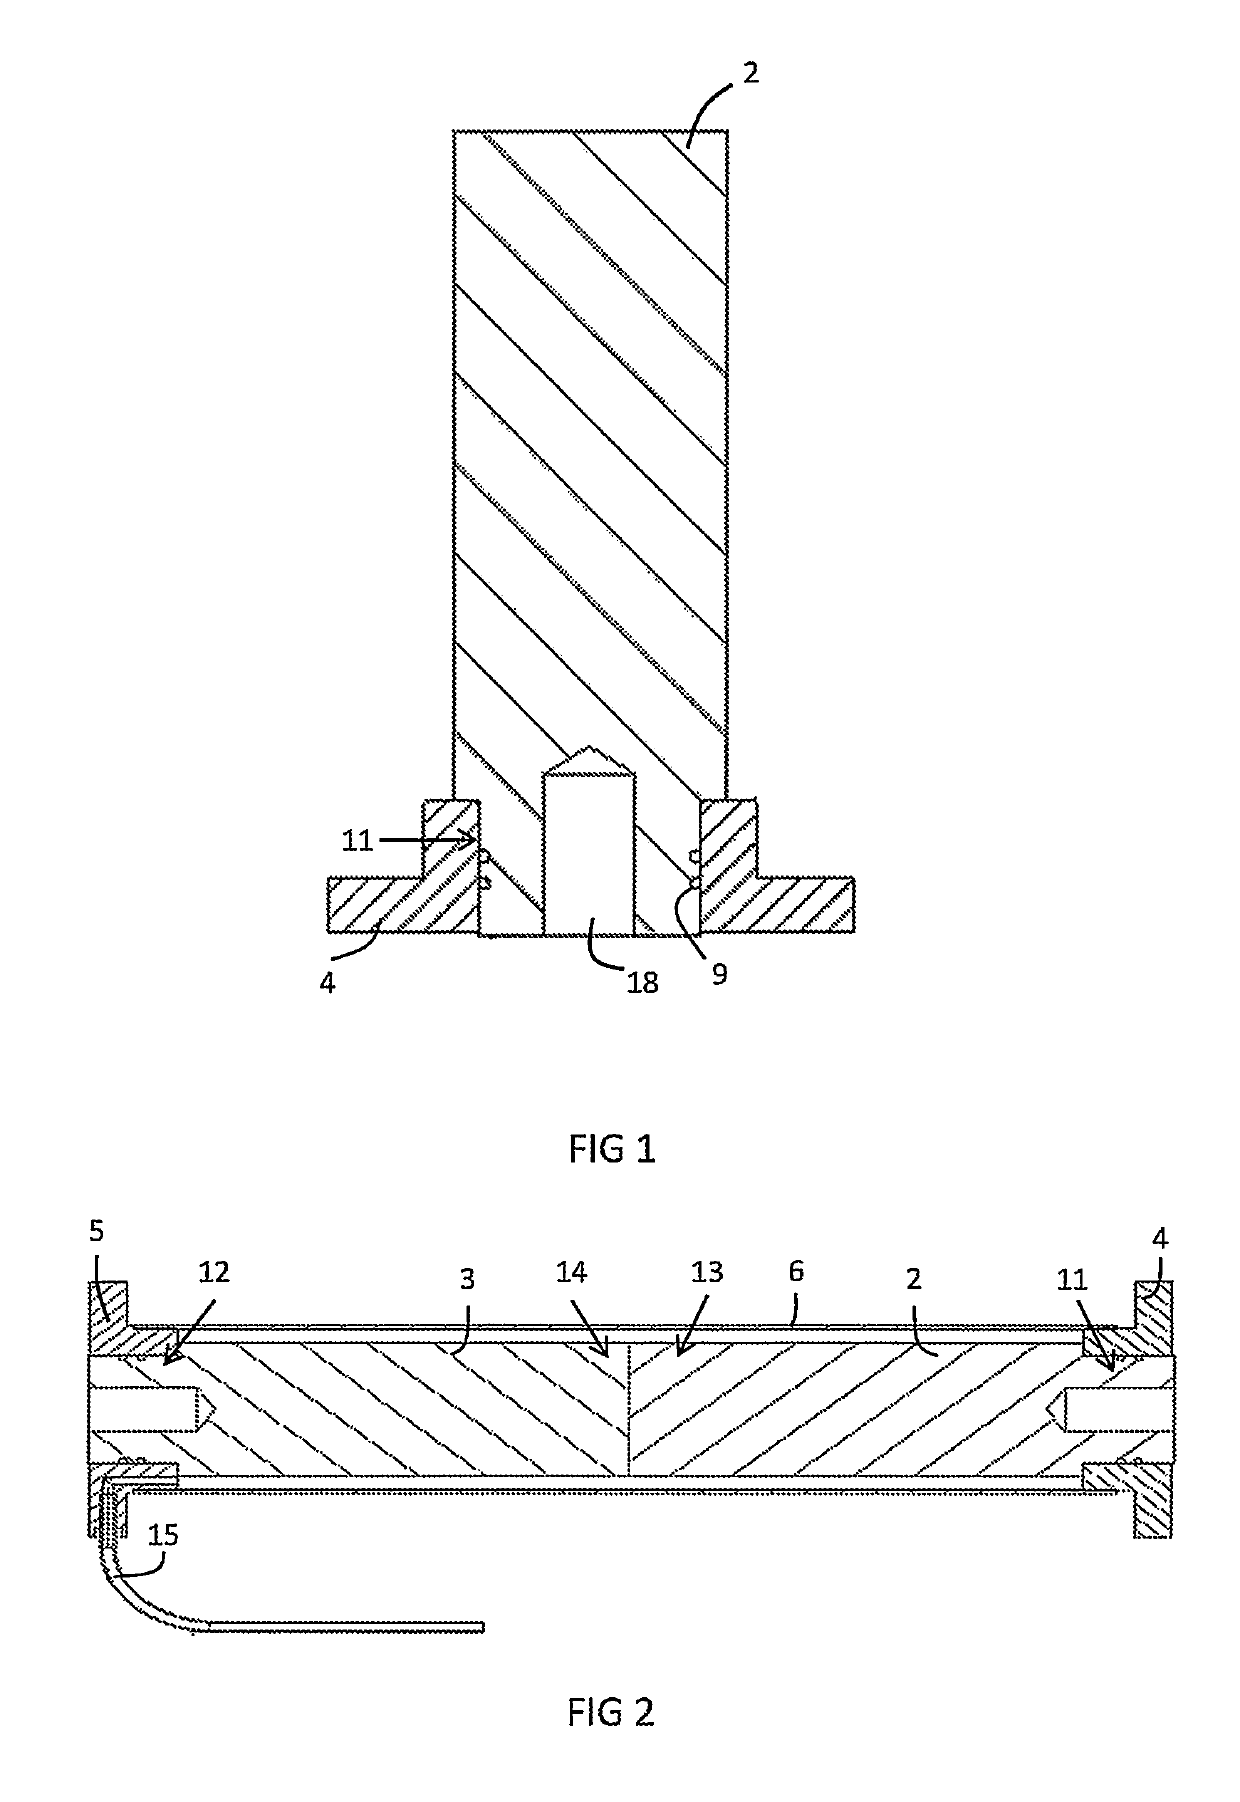 Method of Forming a Heat Switch